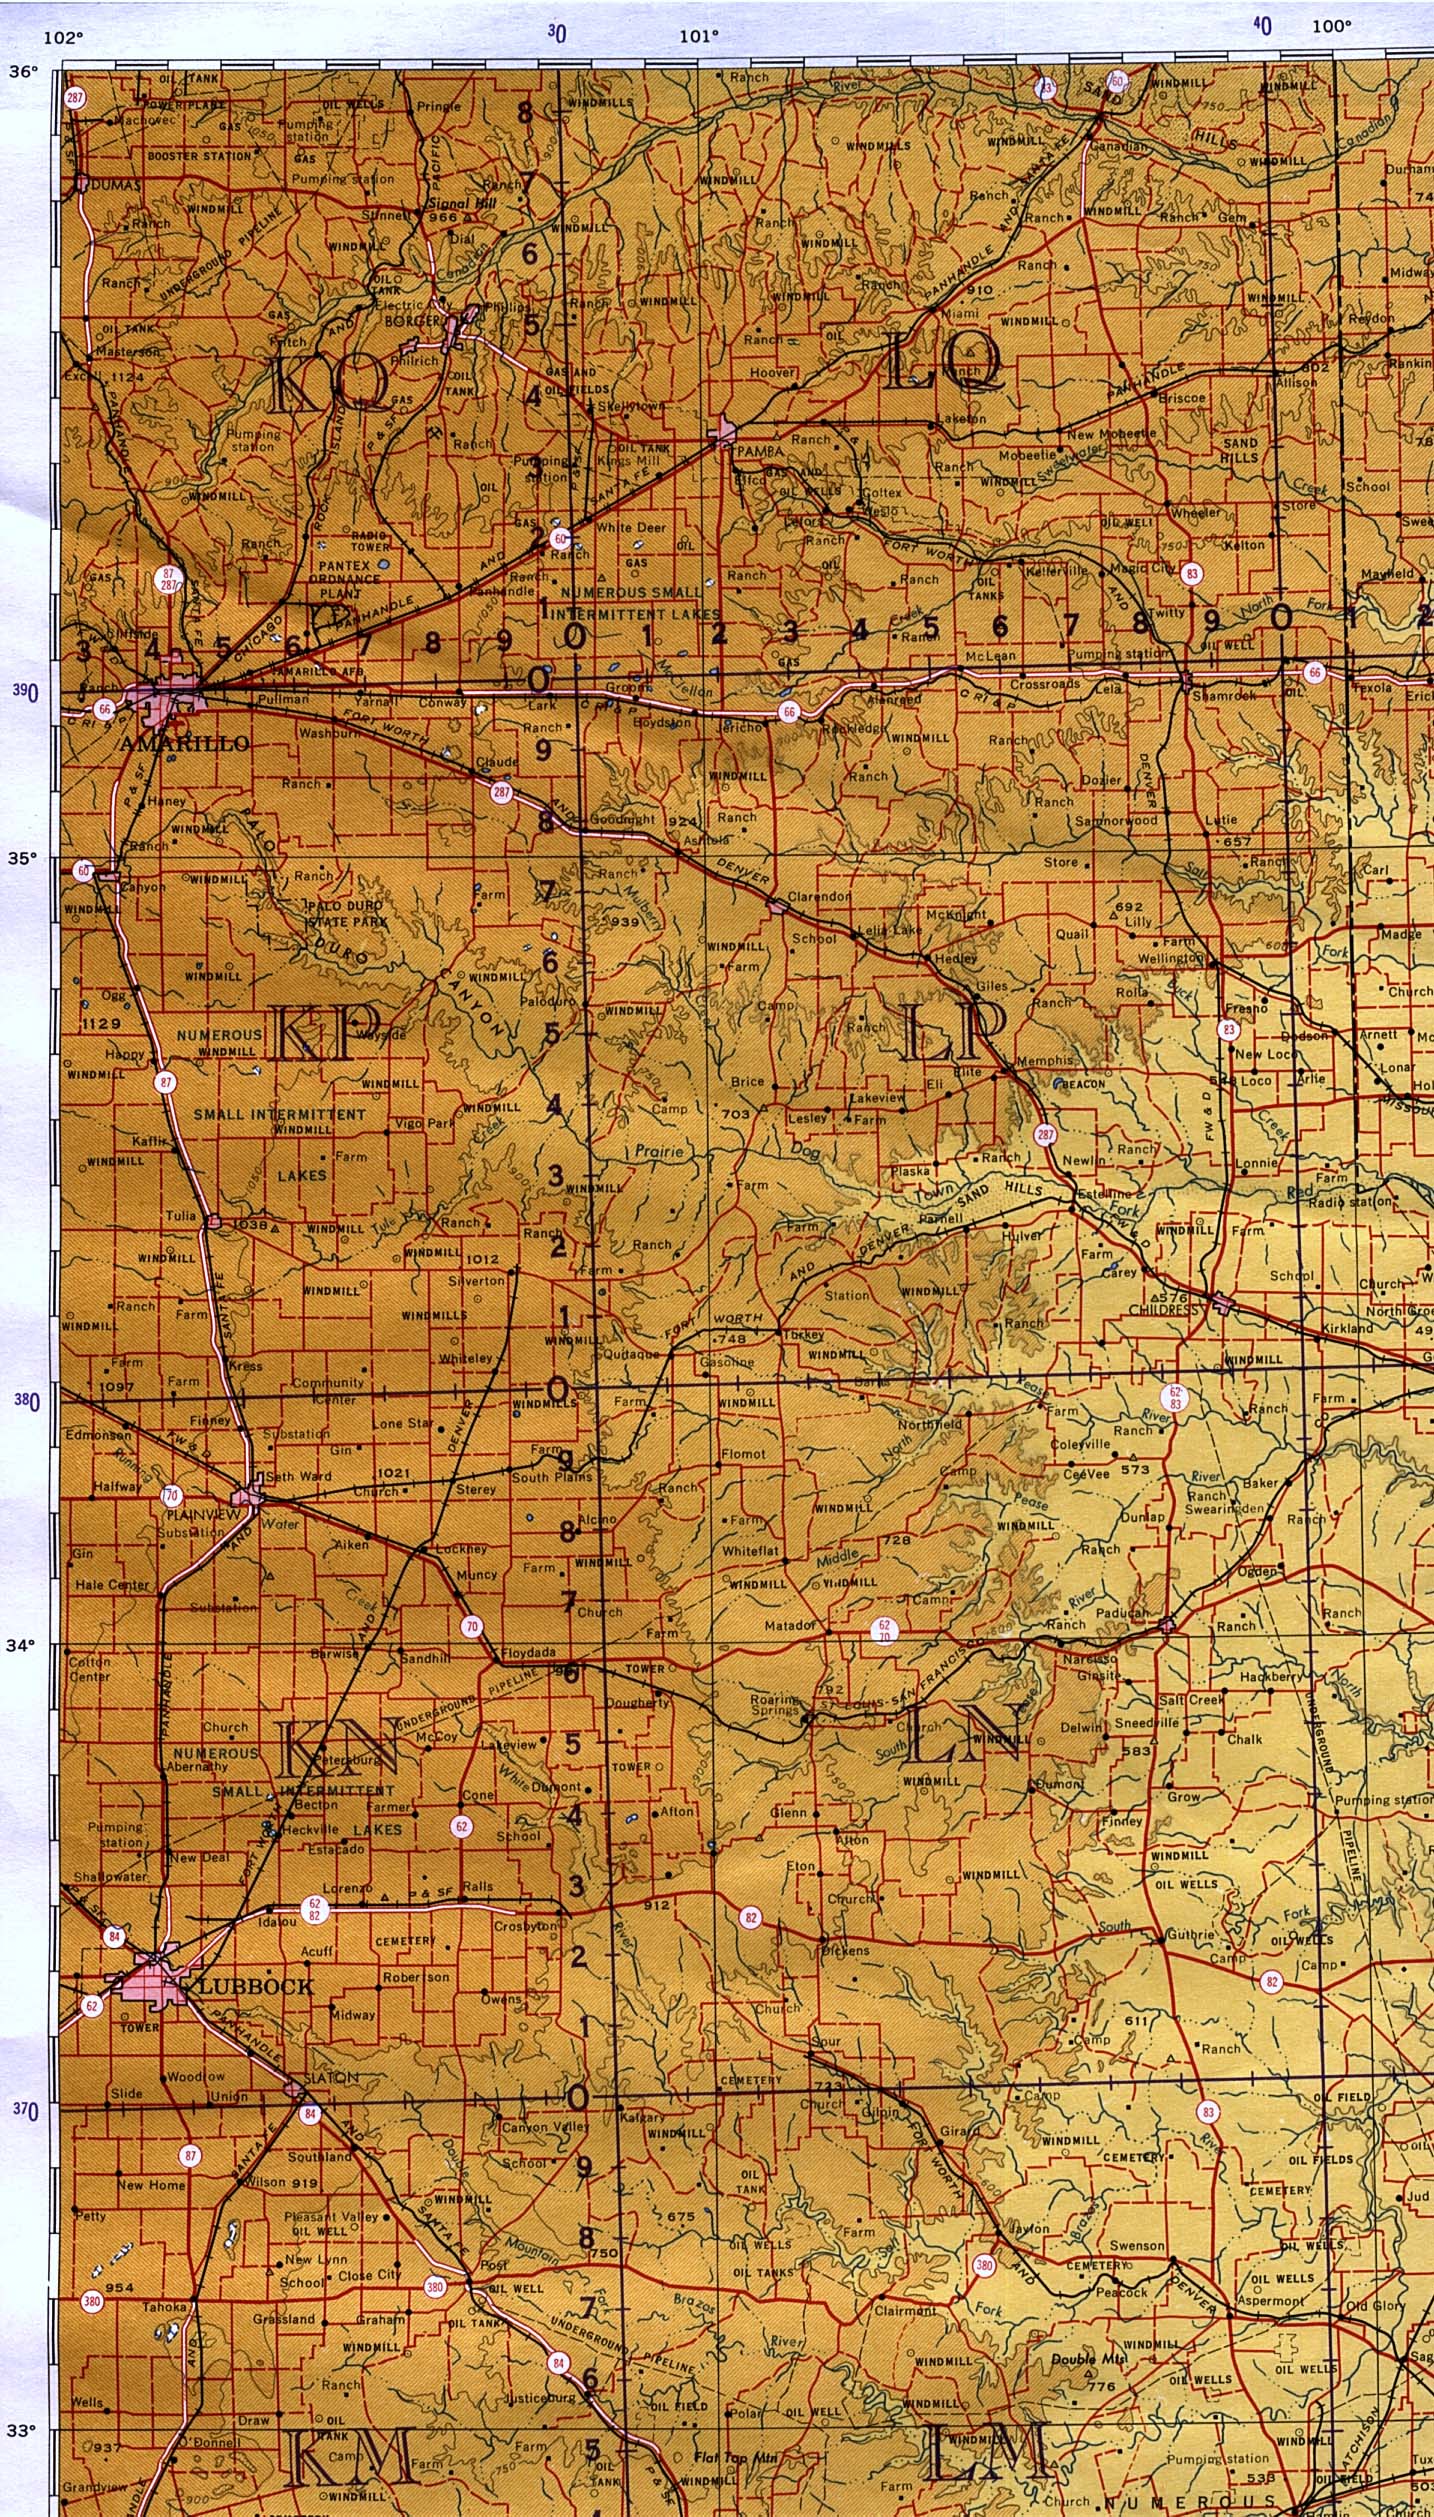 Maps of Texas, Texas - Panhandle - Amarillo, Lubbock and the Eastern Panhandle original scale 1:1,000,000 Portion of International Map of the World, sheet NI 14, U.S. Army Map Service, 1961 (968K)